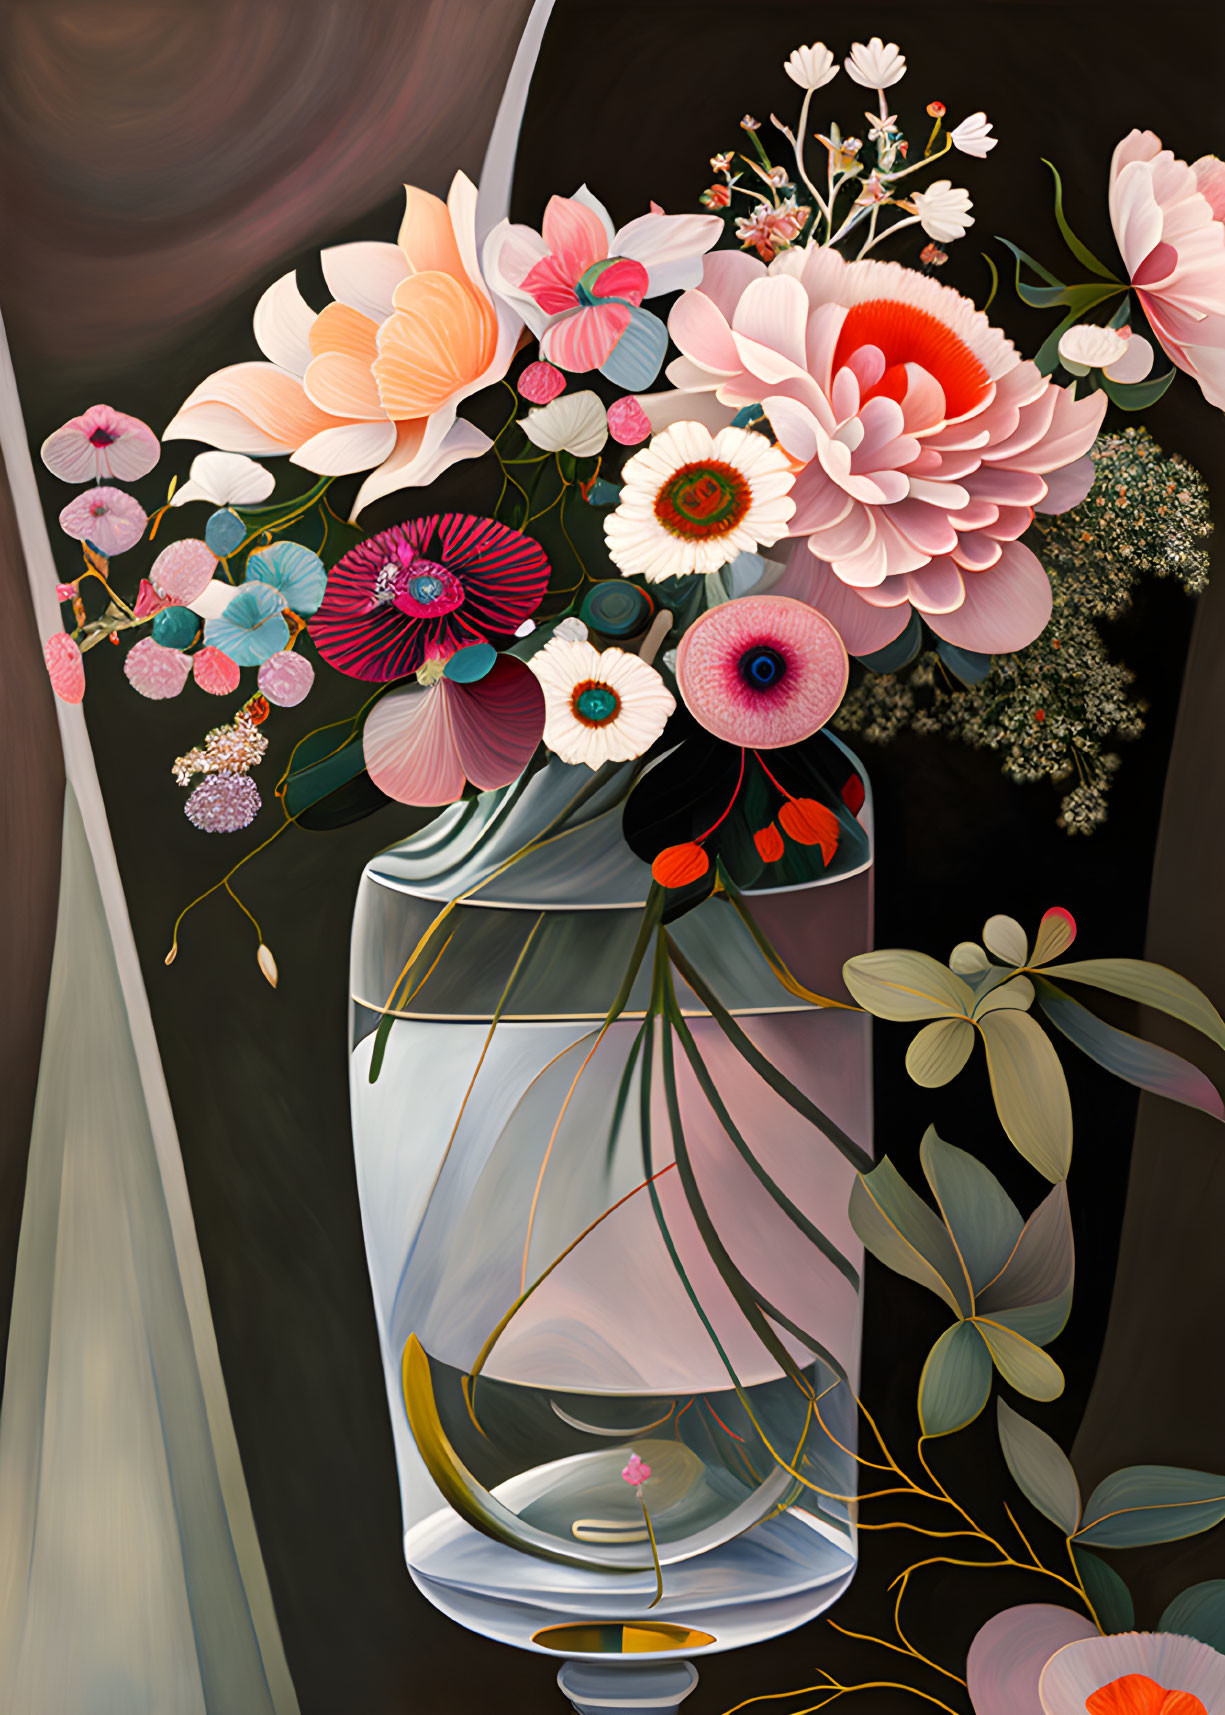 Abstract Vase of Flowers